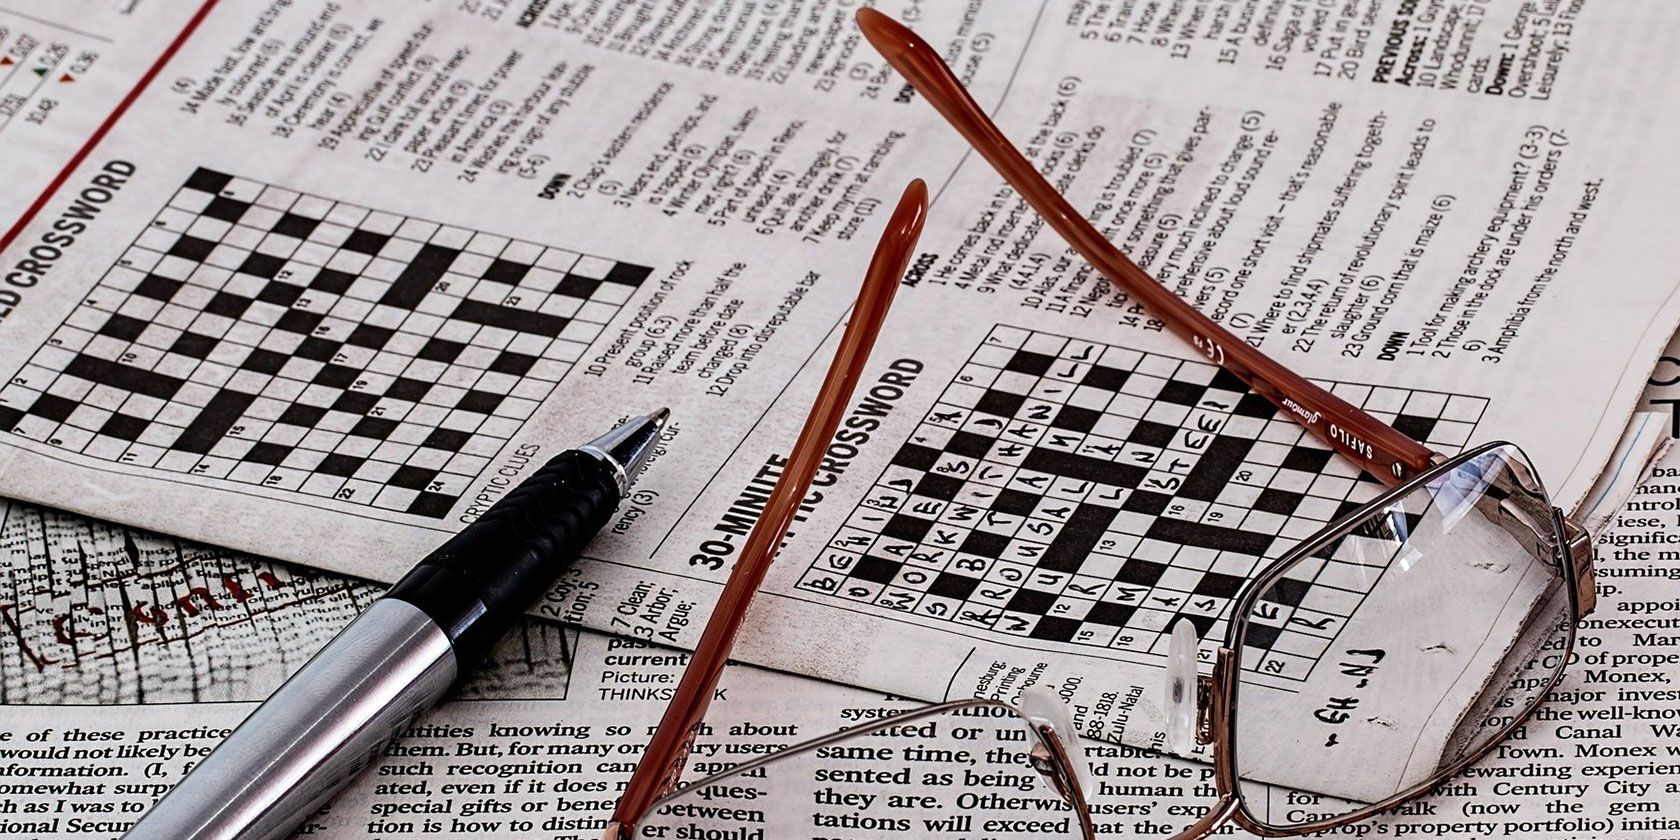 Crossword apps and sites